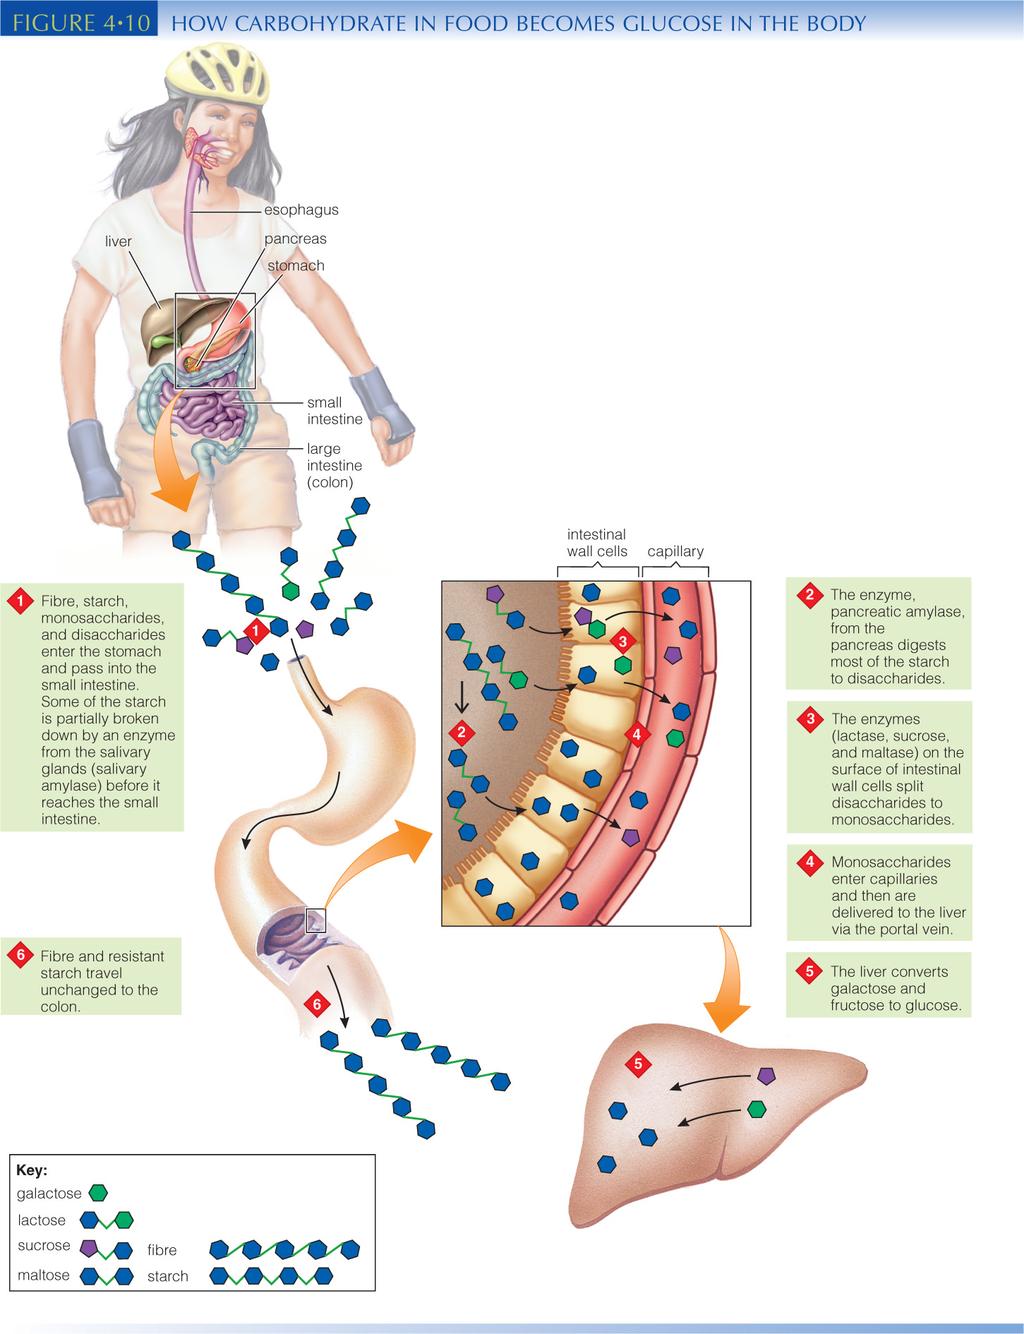 Six Step Summary of the Digestion, Absorption and Transport of Carbohydrates (CHO): Small Intestine (SI) 1) Fiber, starch, monsaccharides move to stomach to SI; some